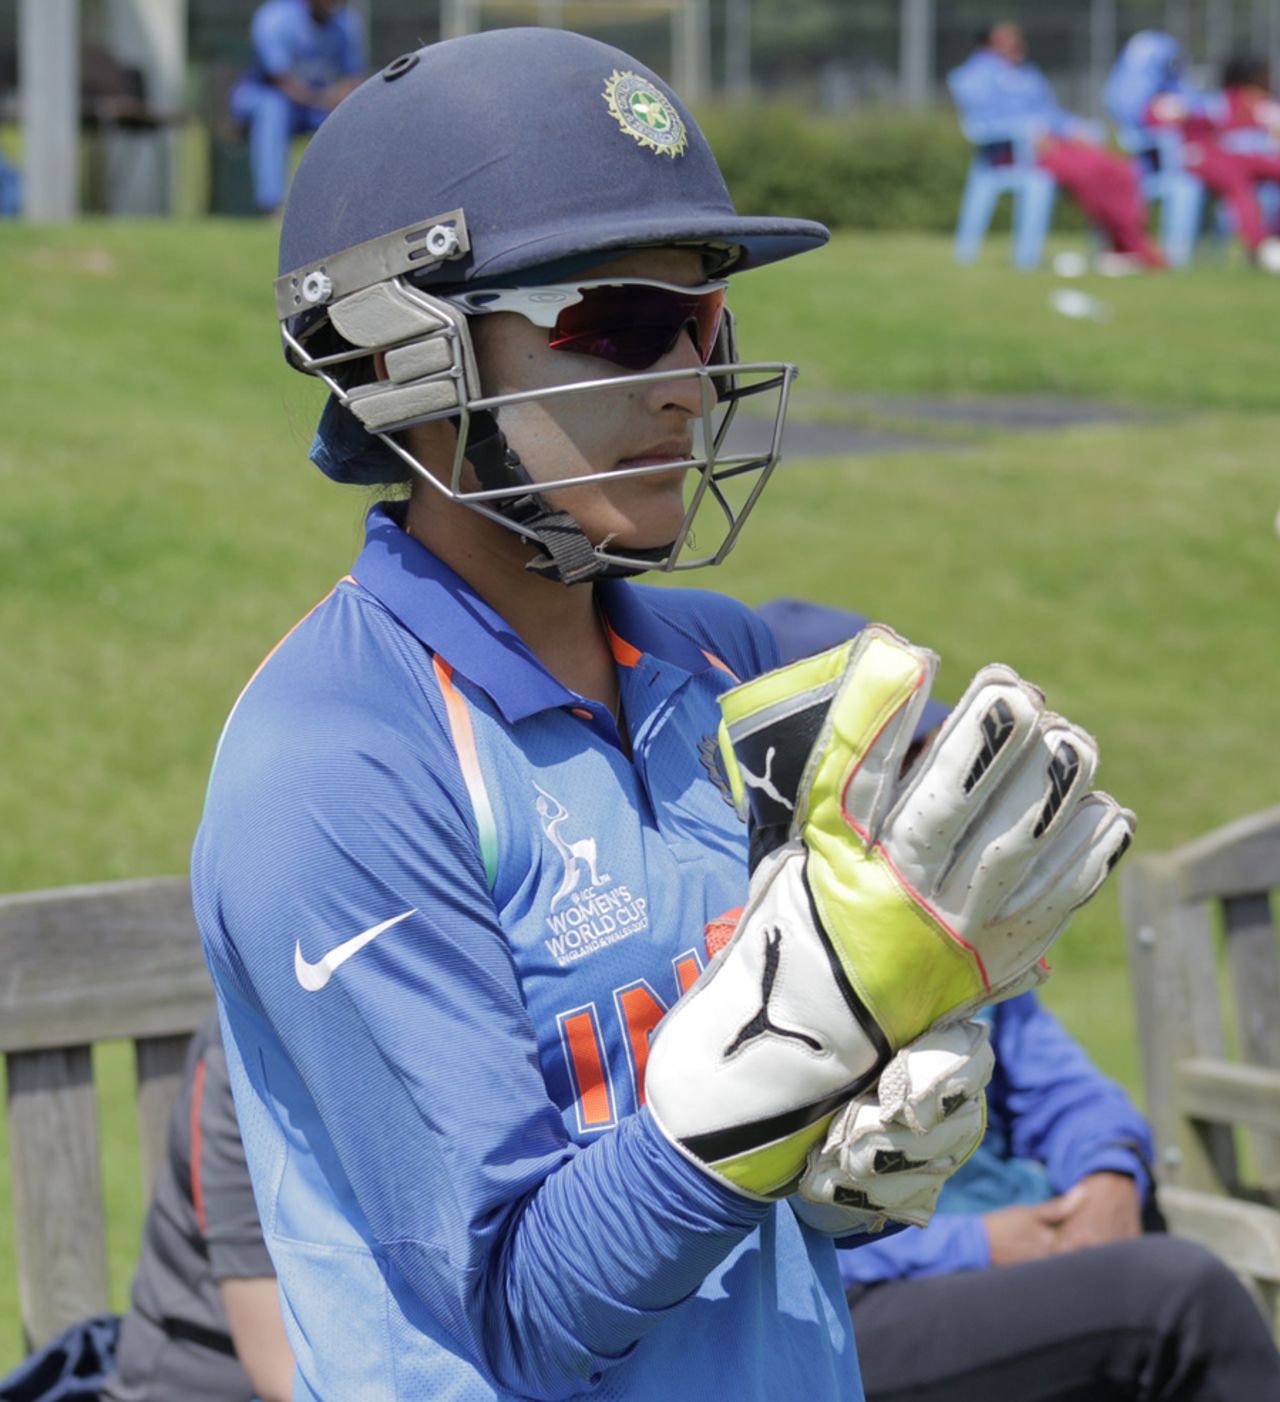 Sushma Verma prepares to take the field, West Indies Women and India Women, unofficial warm-up game, Leicestershire, June 16, 2017